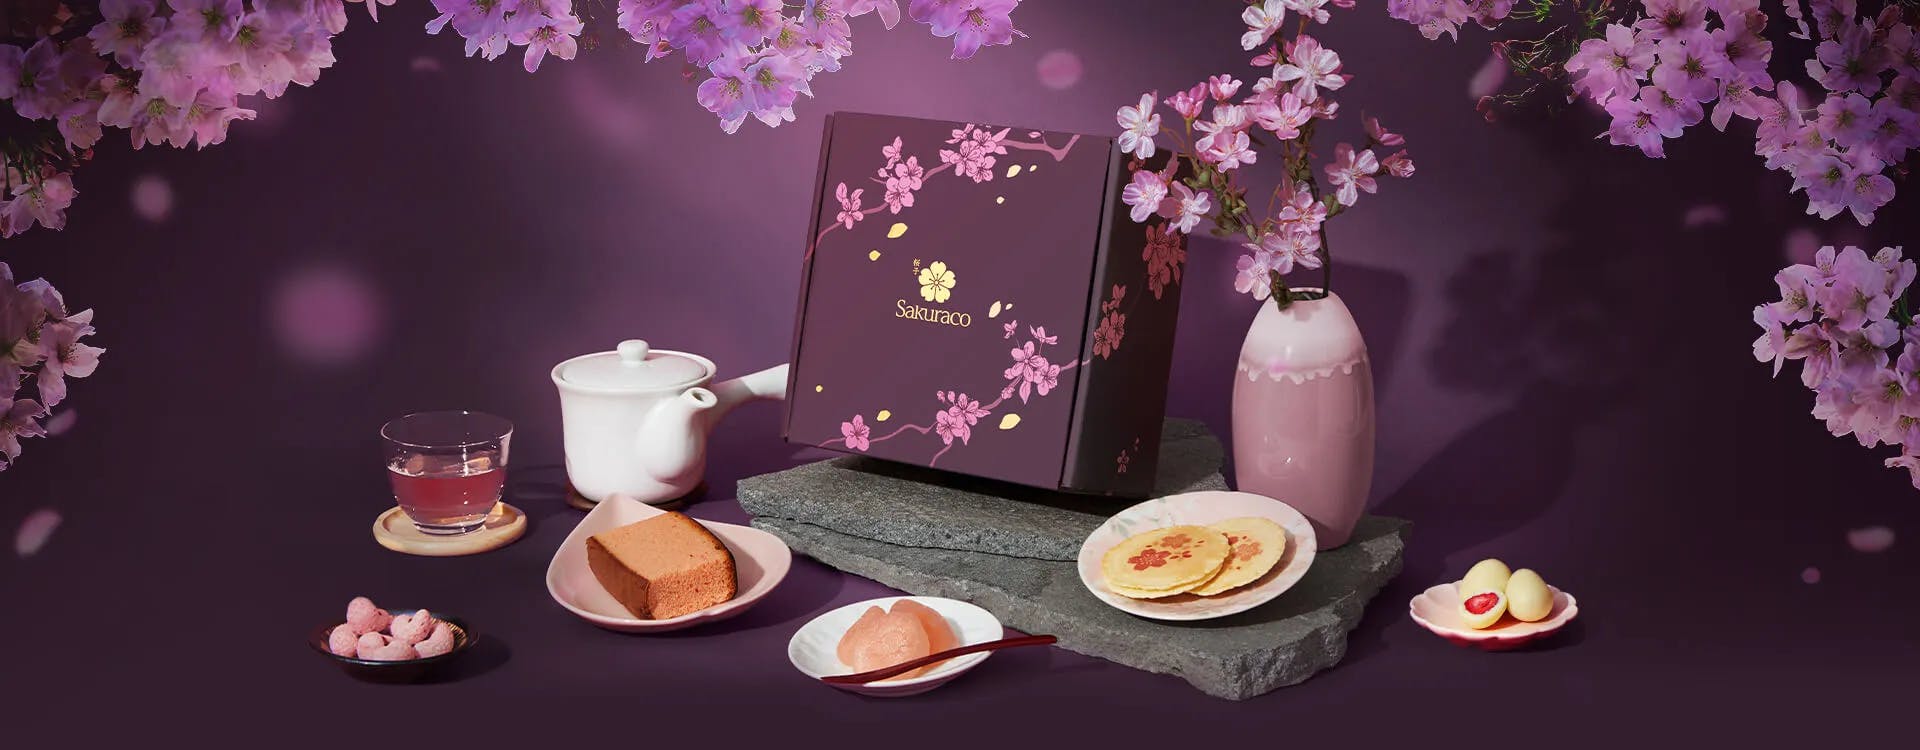 Sakuraco's April Snack Box: A Night of Sakura, surrounded by cherry blossoms in a night setting.